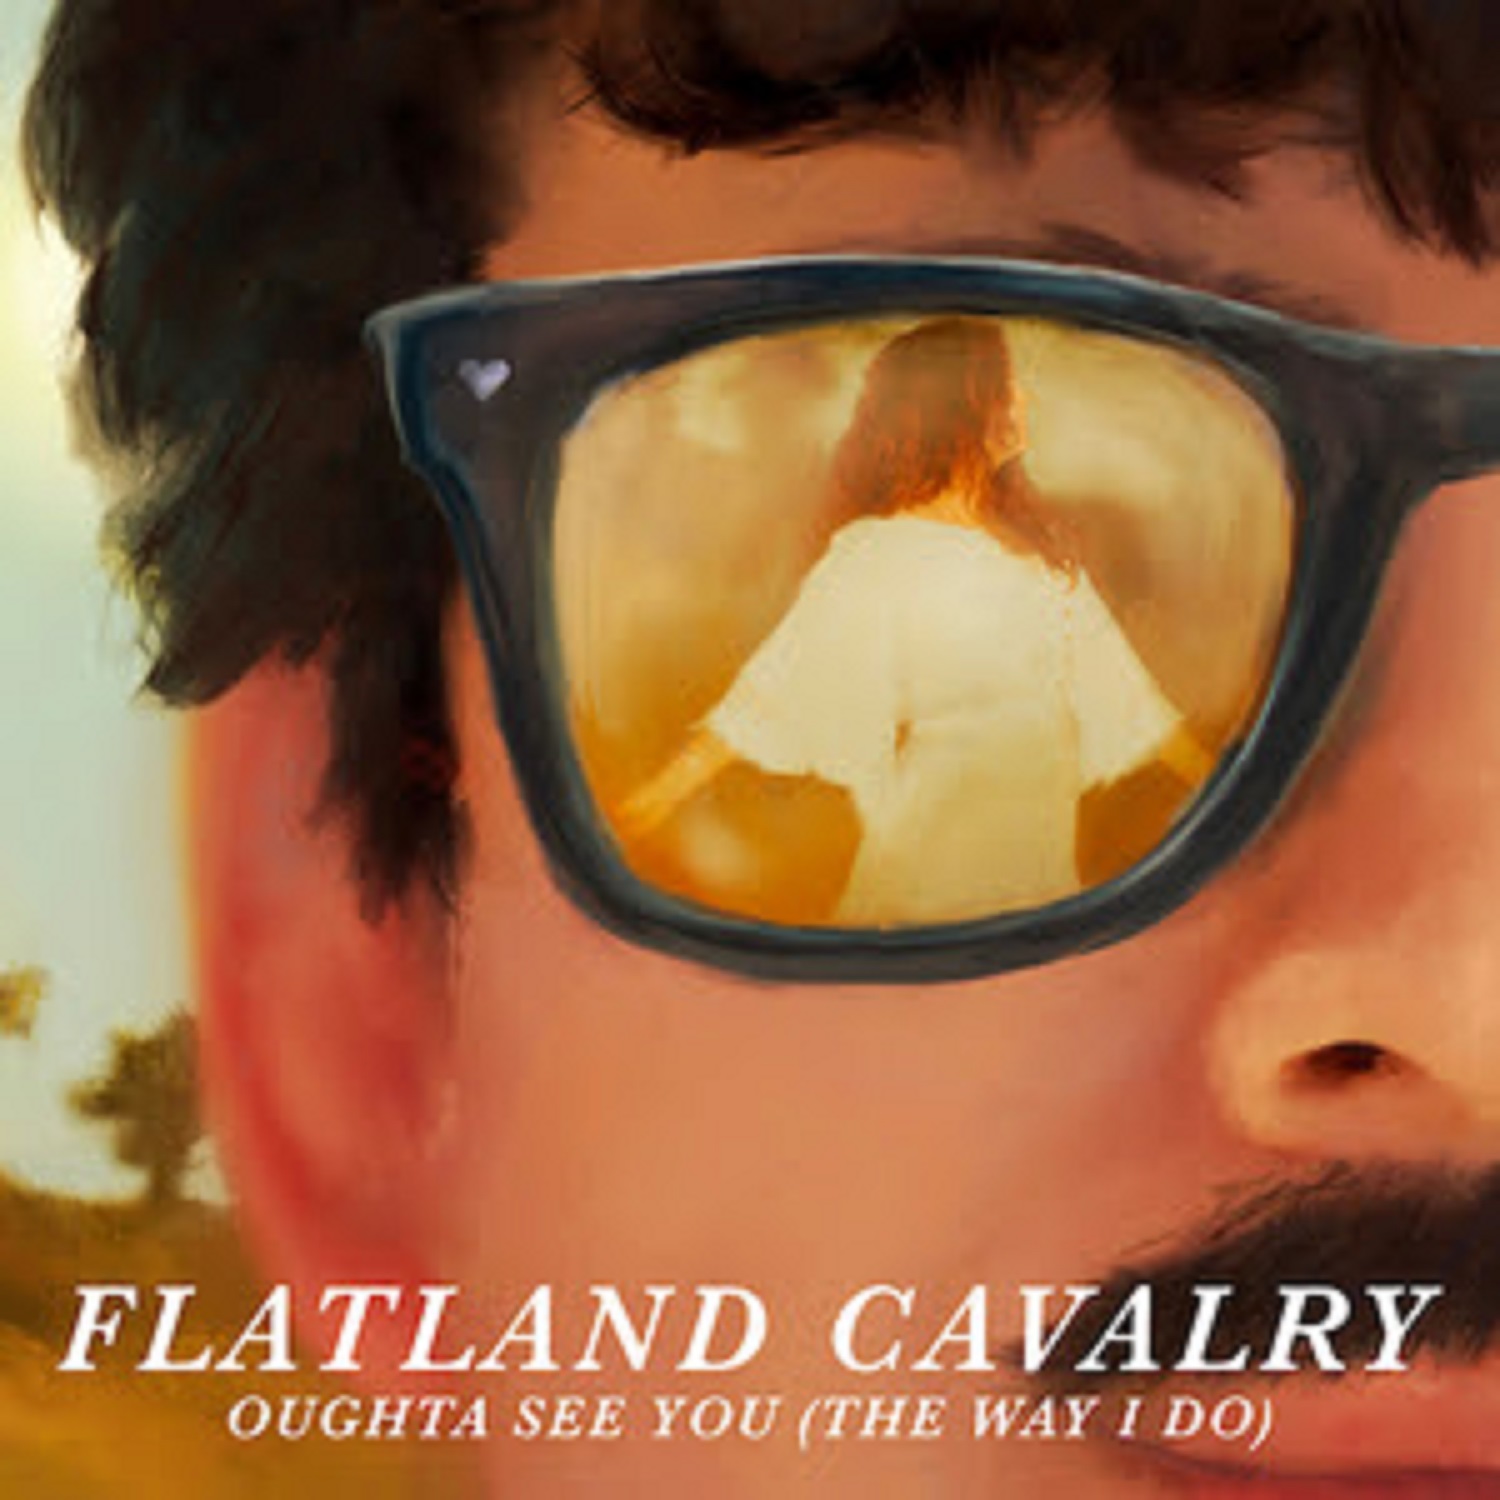 Flatland Cavalry’s new song “Oughta See You (The Way I Do)" debuts today